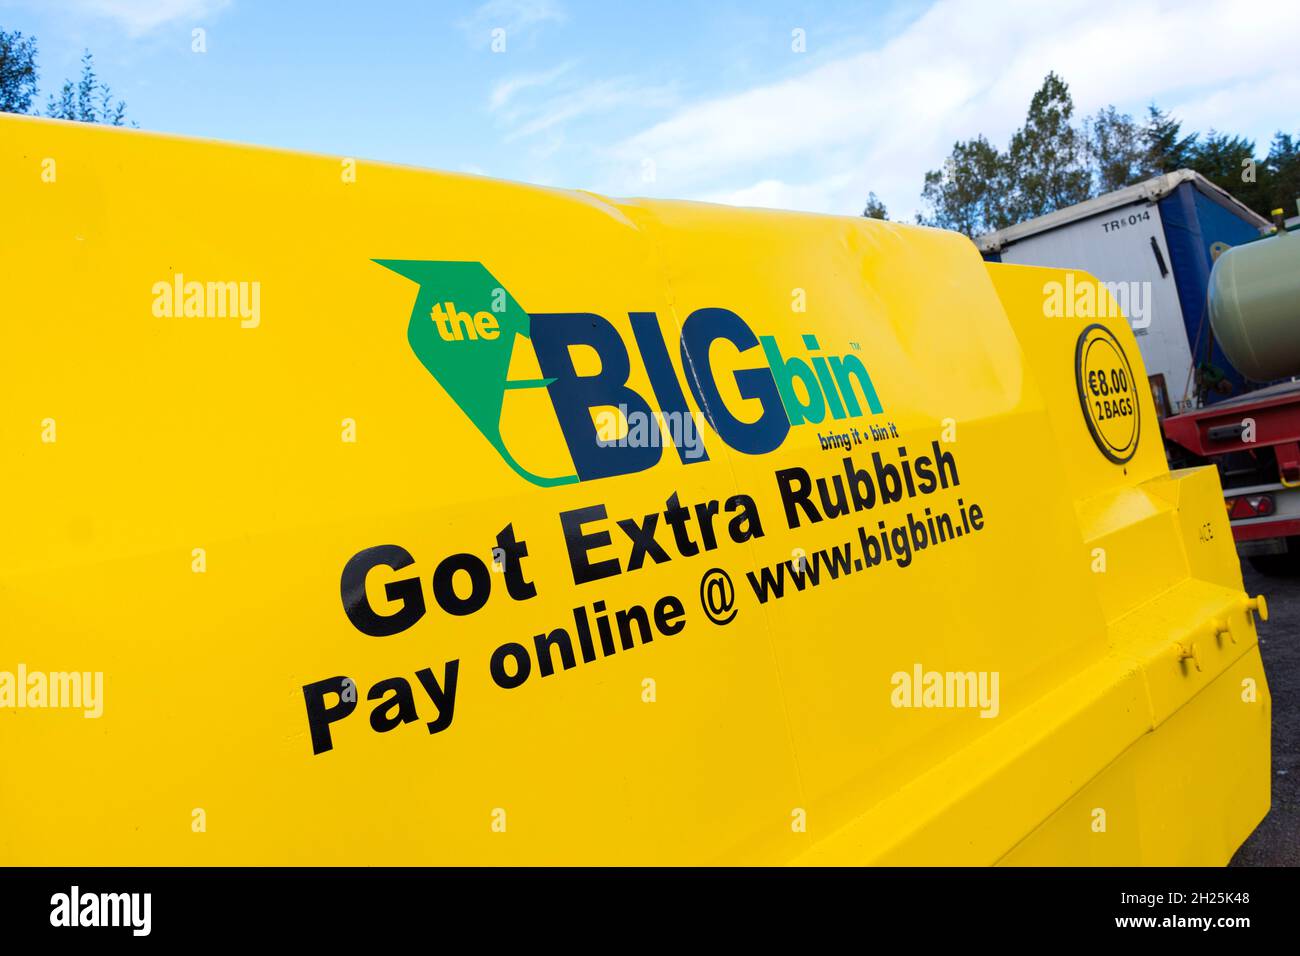 The Big Bin. Extra rubbish container pay online for depositing domestic refuse additional to normal collection in Ireland Stock Photo